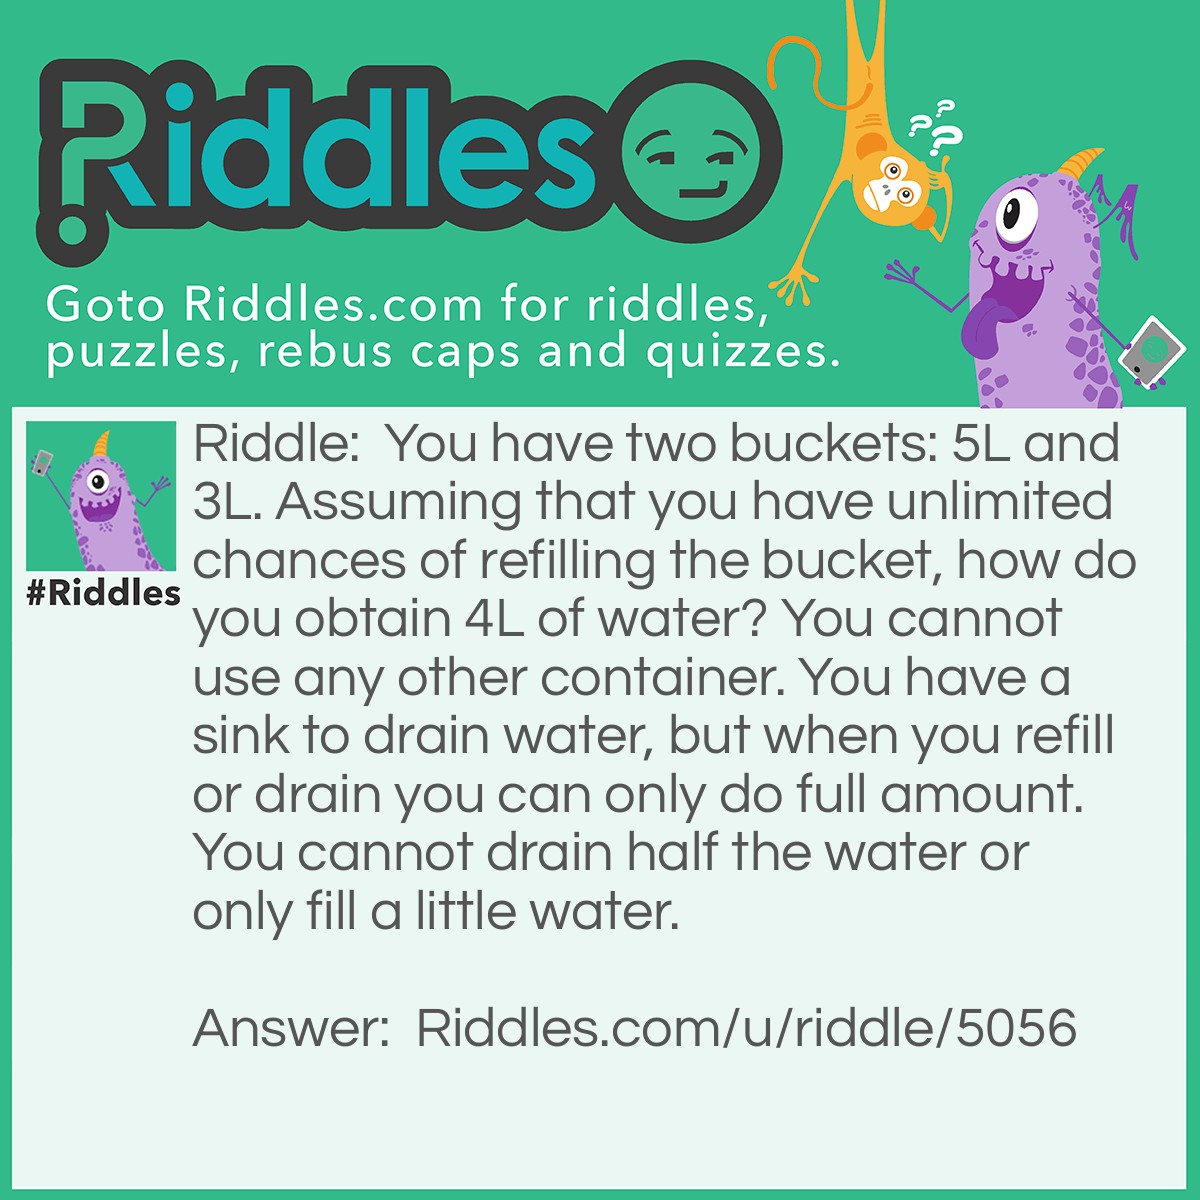 Riddle: You have two buckets: 5L and 3L. Assuming that you have unlimited chances of refilling the bucket, how do you obtain 4L of water? You cannot use any other container. You have a sink to drain water, but when you refill or drain you can only do full amount. You cannot drain half the water or only fill a little water. Answer: 1. Fill the 5L bucket and use it to fill the 3L bucket. You now have a full 3L bucket and 2L of water in the other. 2. Pour the 2L of water into the 3L bucket. Now you have a 3L bucket with 2L water in, and an empty 5L bucket. 3. Fill the 5L bucket and fill the 3L bucket. Because the 3L bucket has only 1L space left from step 2, it can only hold 1 more litre. From this, you get 4L of water left in the 5L bucket.